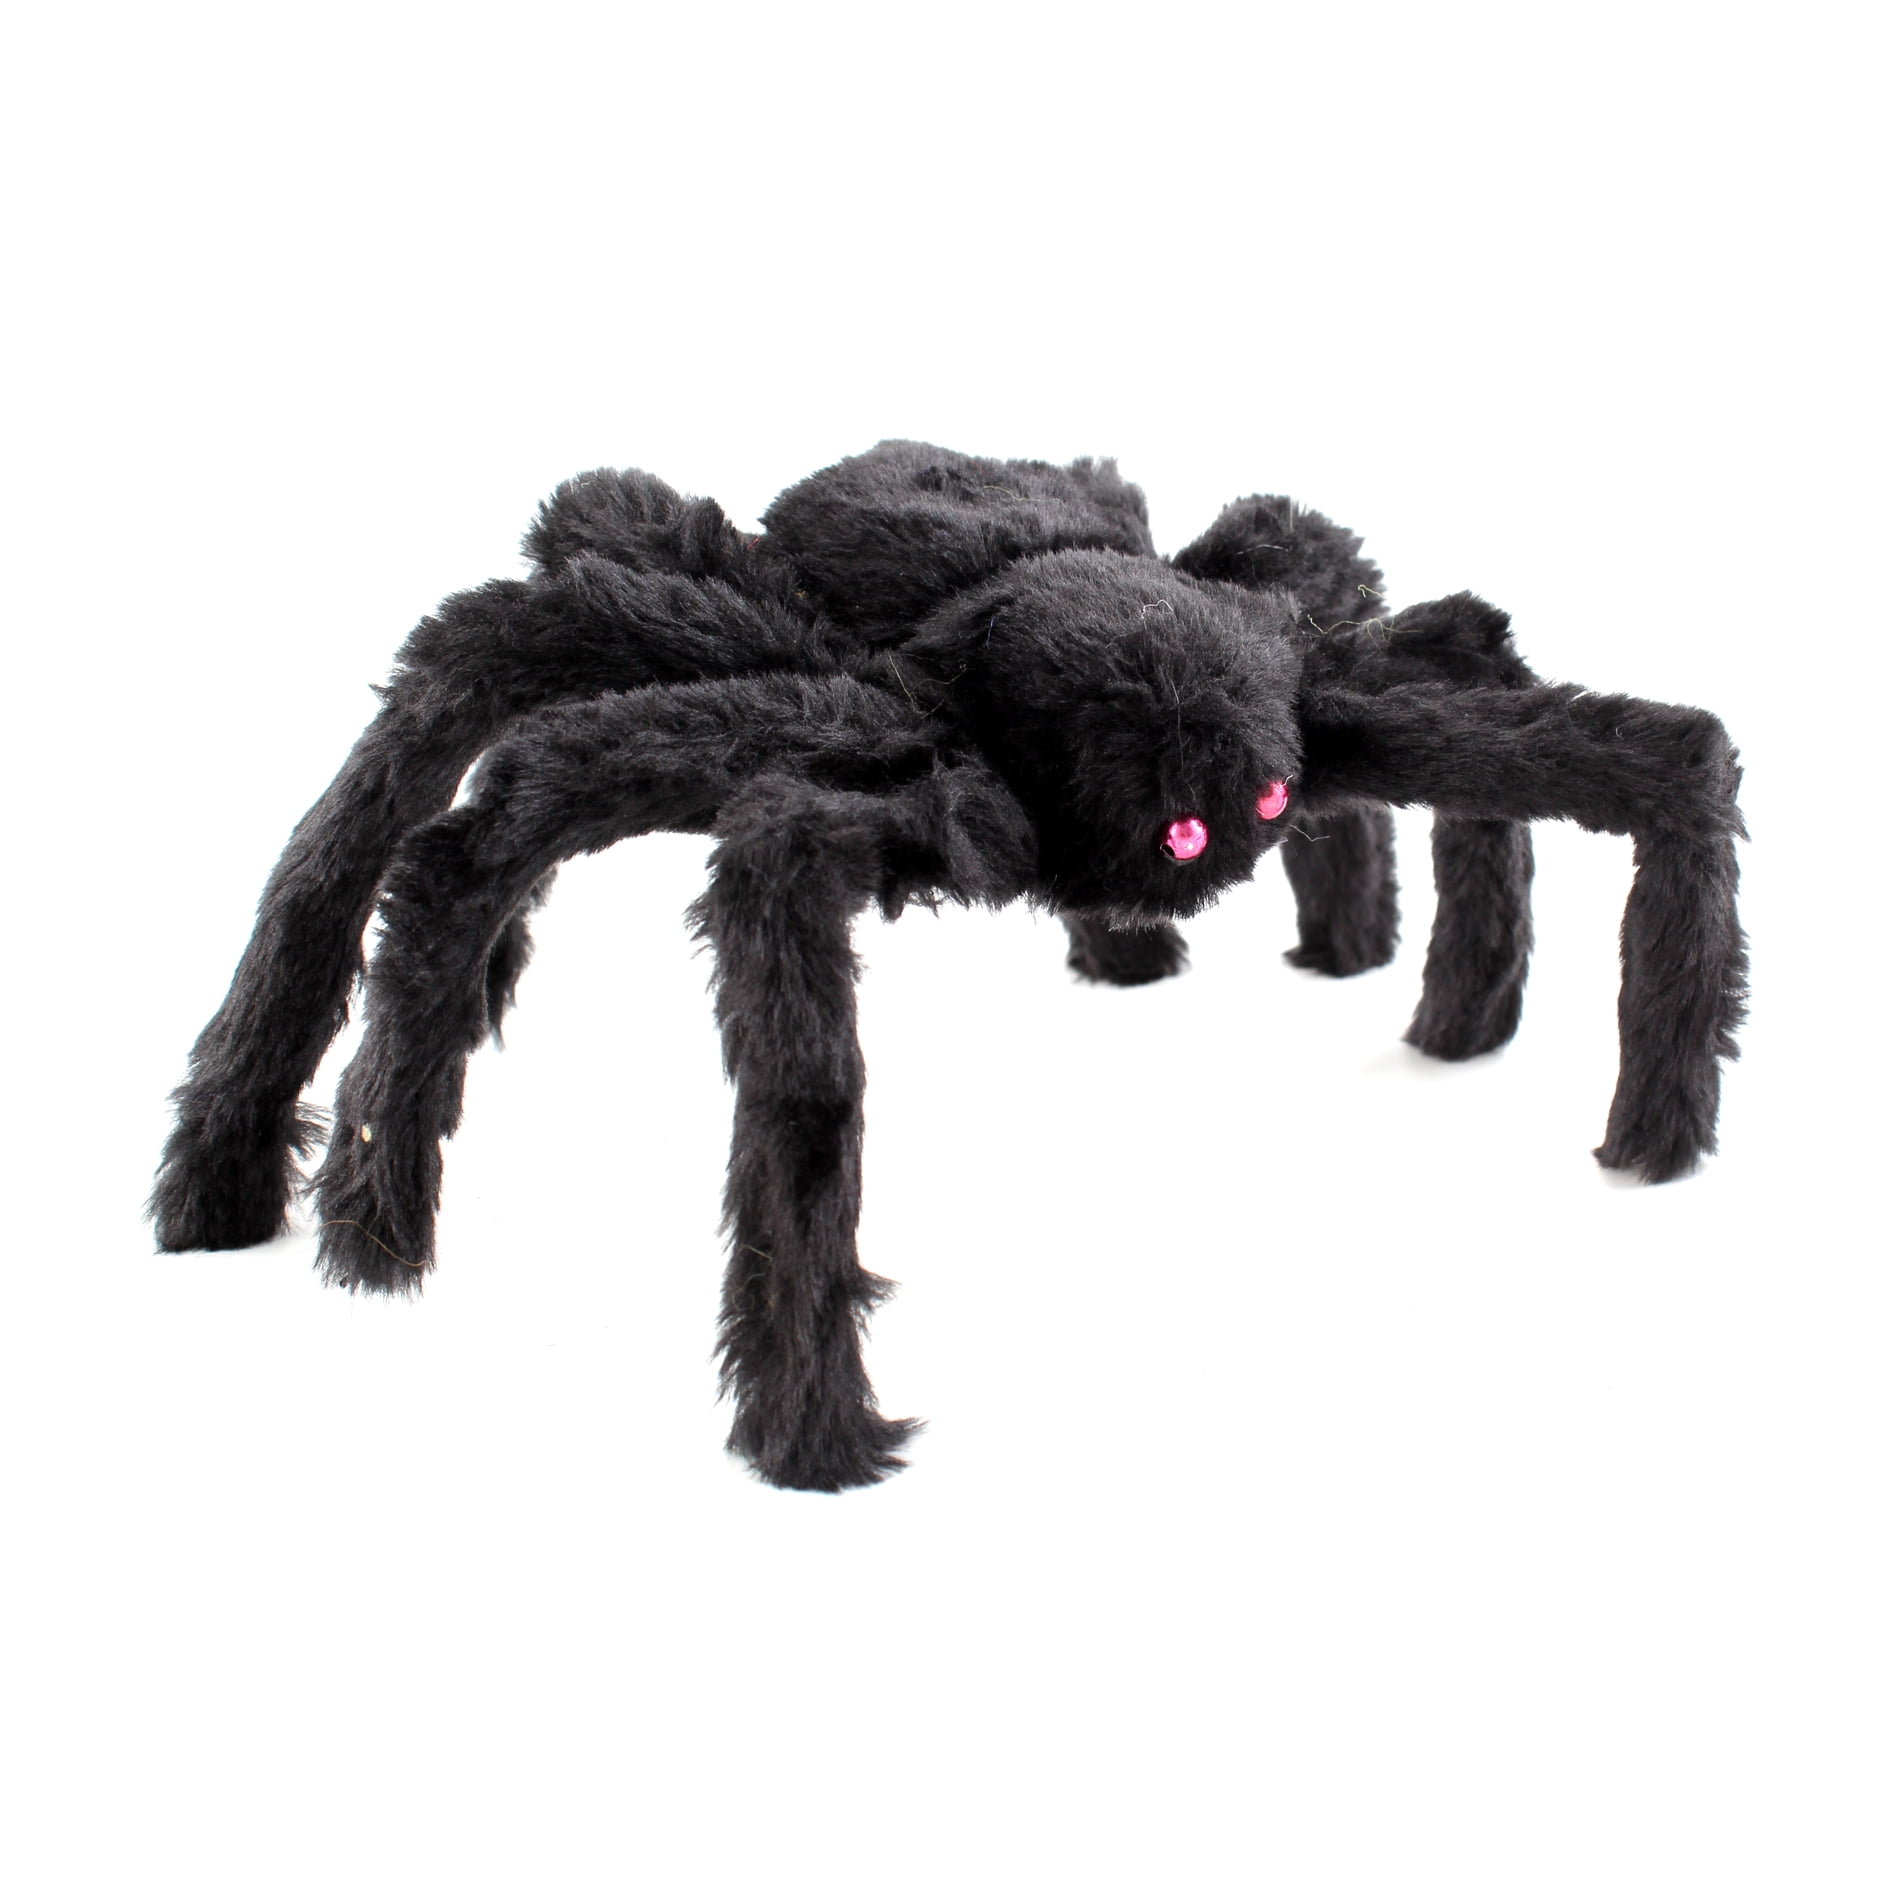 scary spider toy